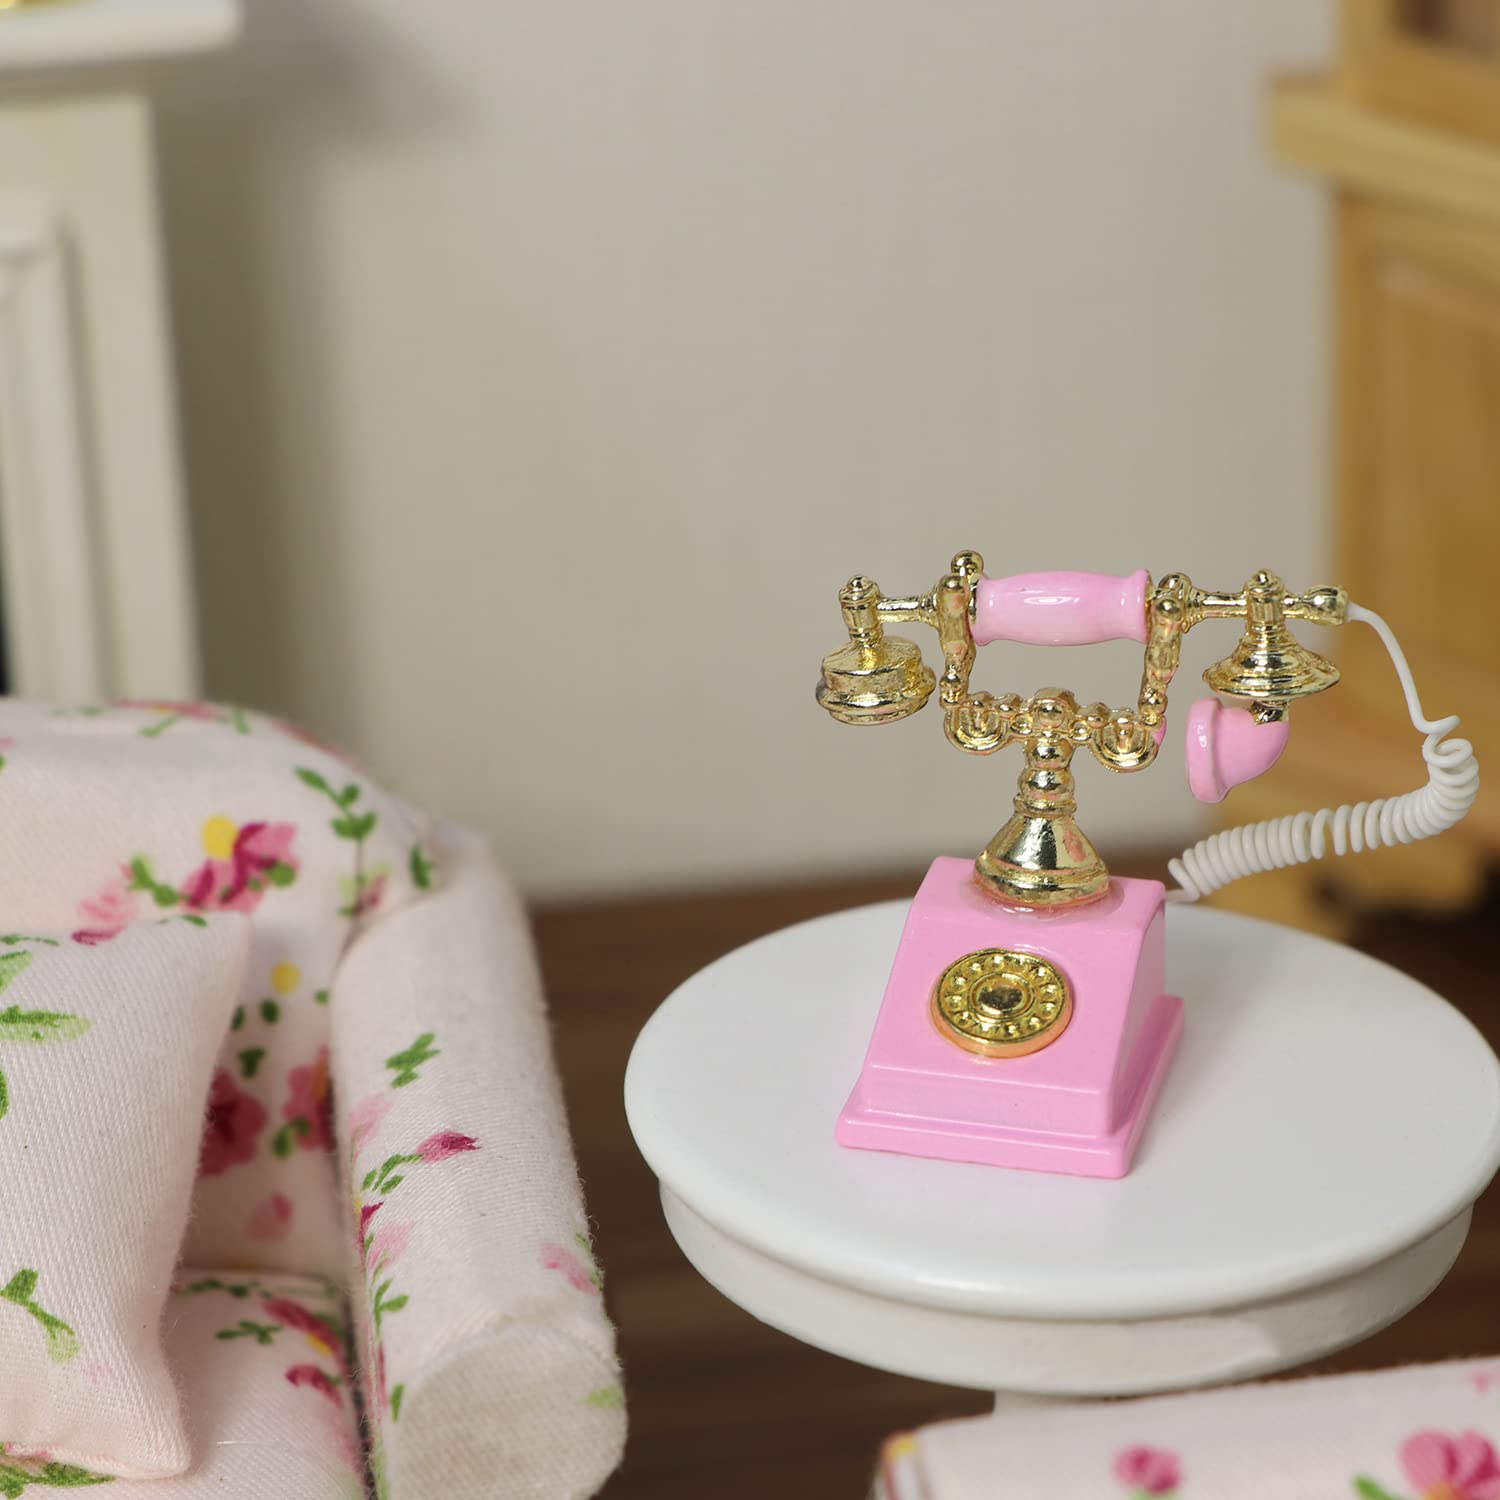 Dollhouse Circle Table and Telephone Miniature Accessories